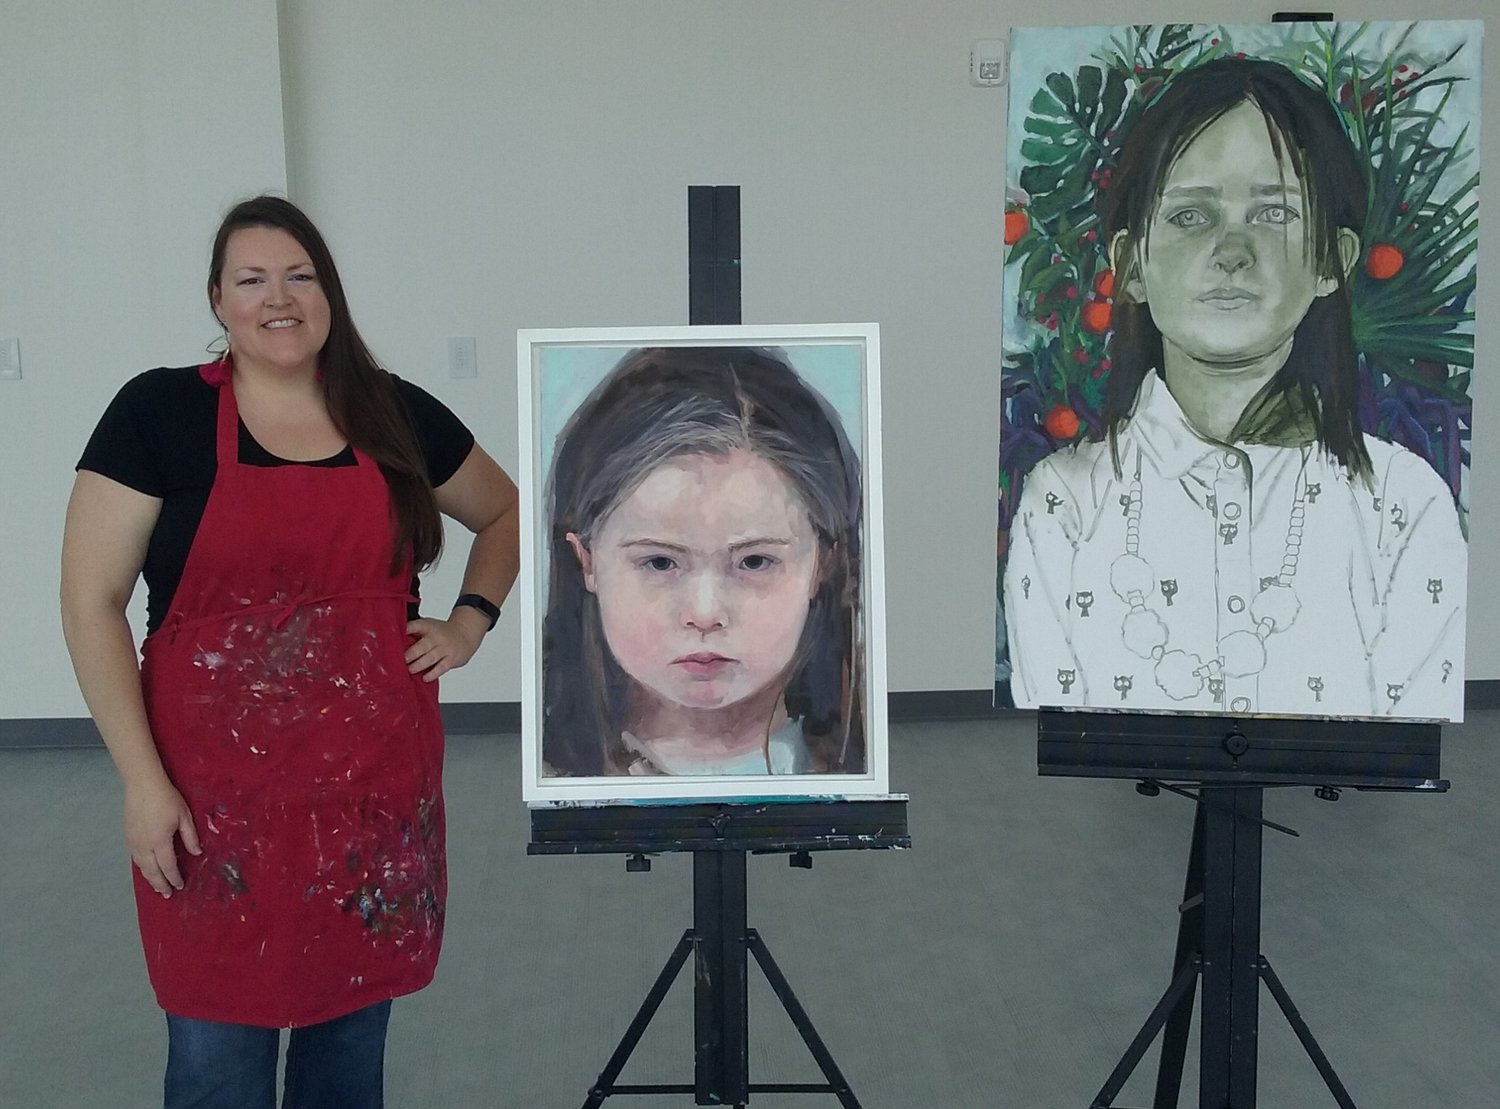 Painter Marisa Yow gave a live painting demonstration during the Cultural Center’s ‘Grand Opening of the Arts’ at the link on Thursday, July 15. The painting at left is finished, and the painting at right is a work in progress.